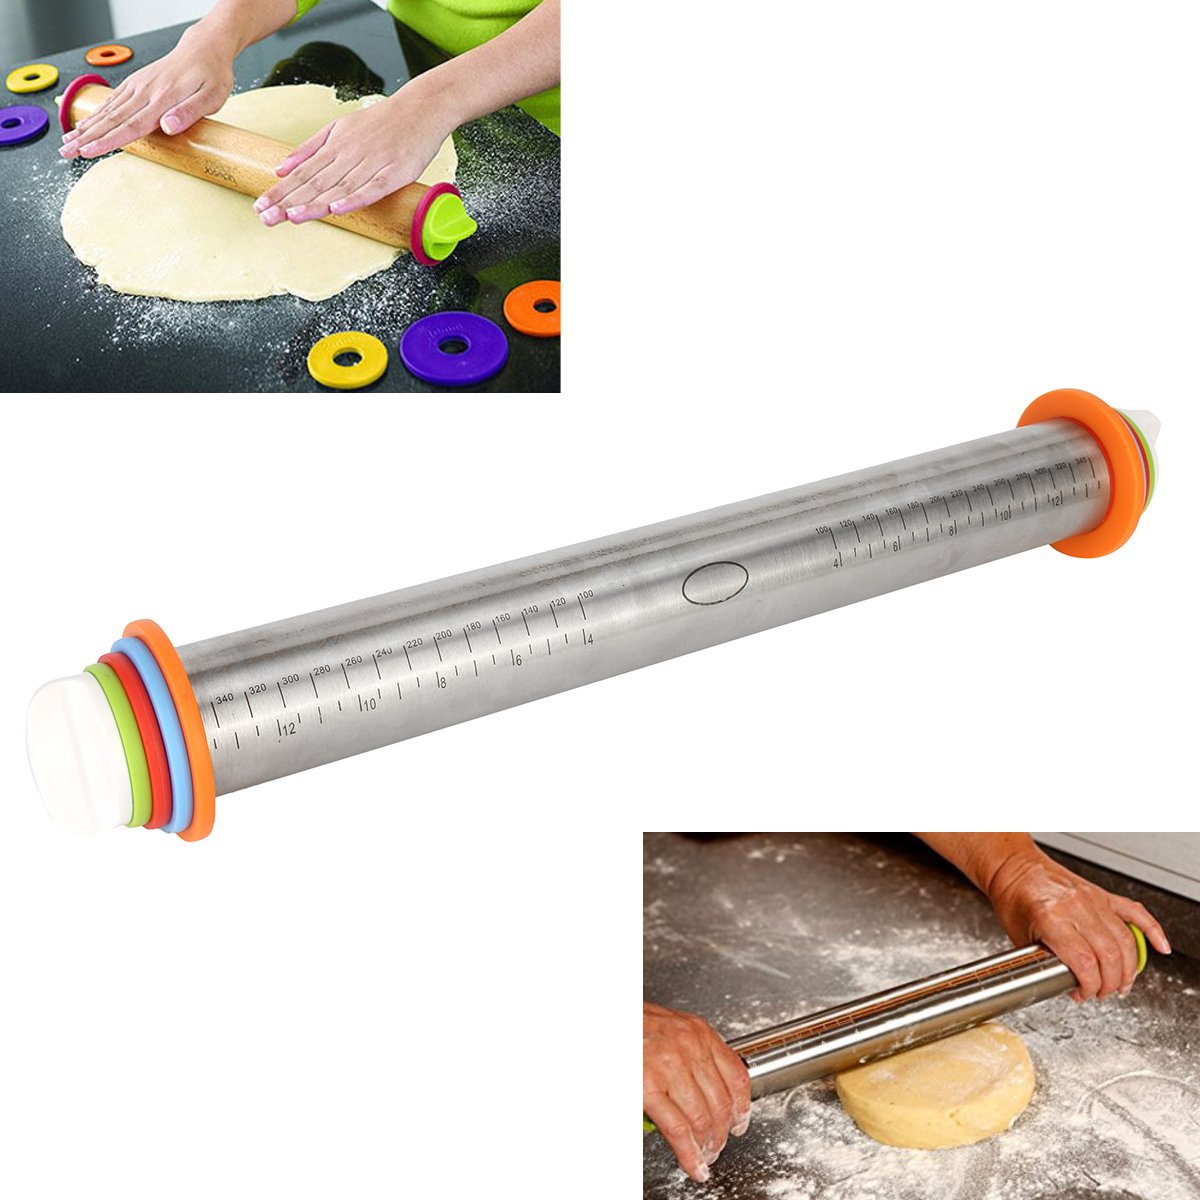 Stainless-Steel-Removable-Rolling-Pin-Tools-For-Baking-Dough-Pizza-Cookies-4-Sizes-Adjusting-Discs-1141081